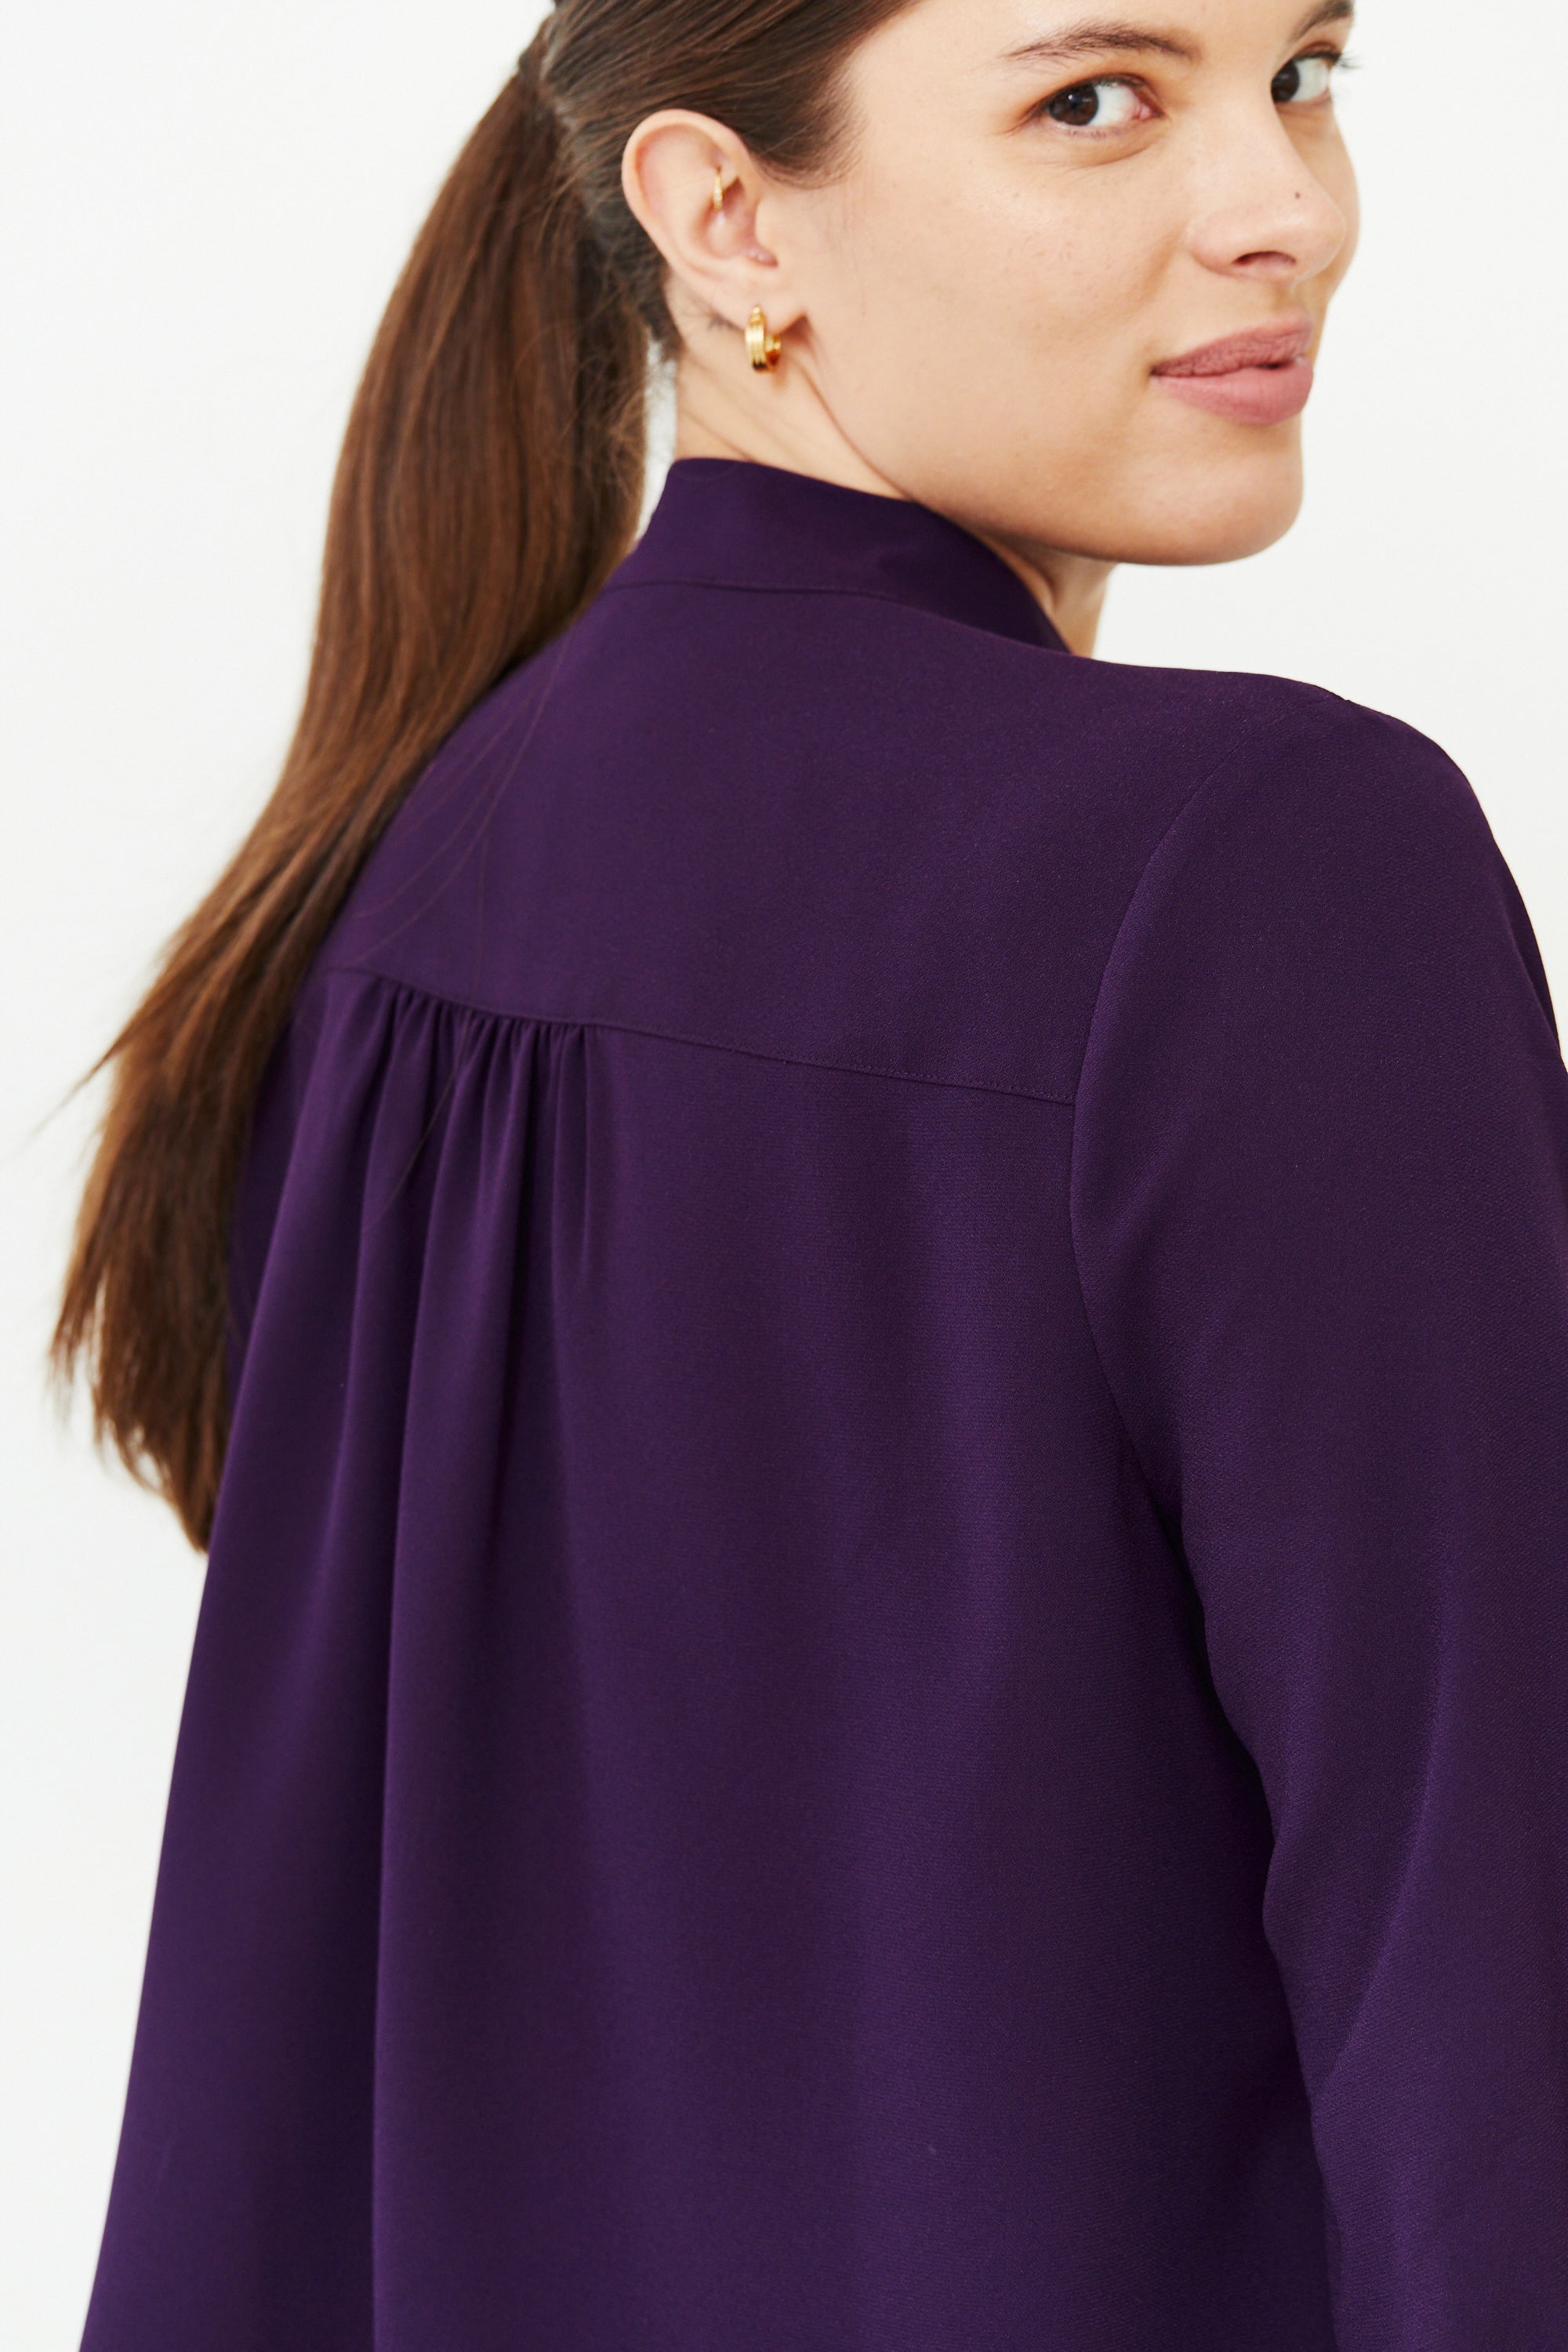 The Ace Blouse in Eminence